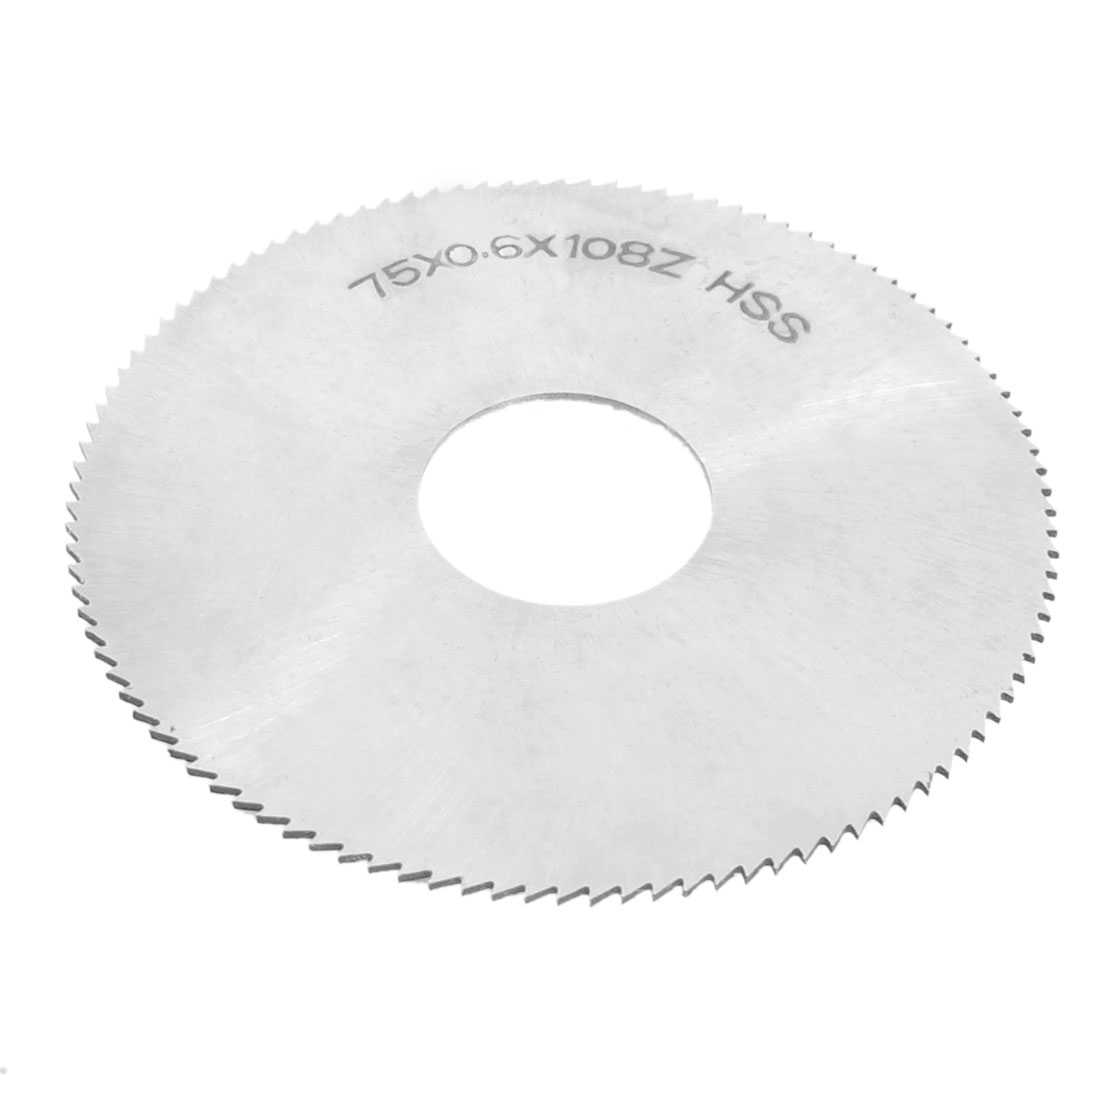 Unique Bargains 75mm Outer Diameter 0.6mm Thickness 22 Hole Dia HSS Slitting Saw 108 Teeth